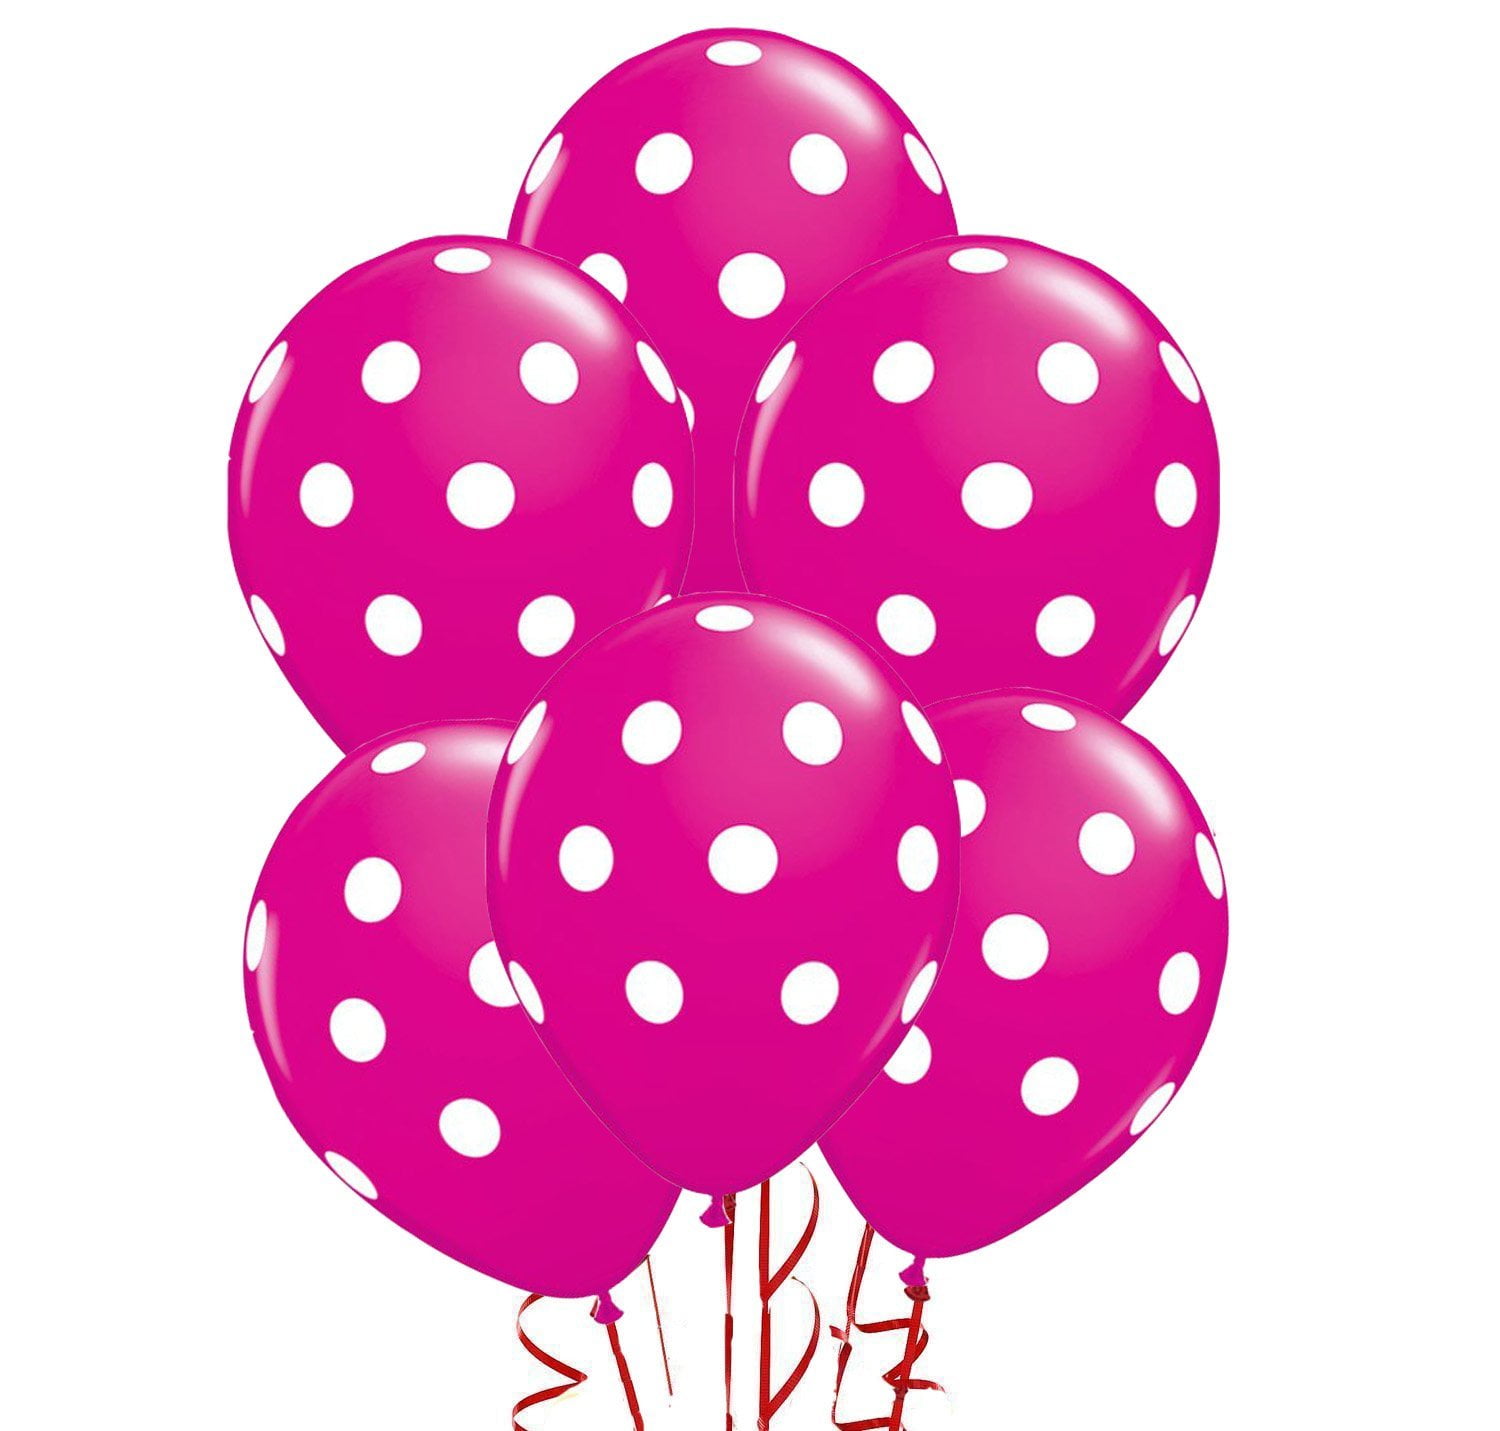 Polka Dot Balloons 11inch Premium Berry Hot Pink with All-Over Print ...